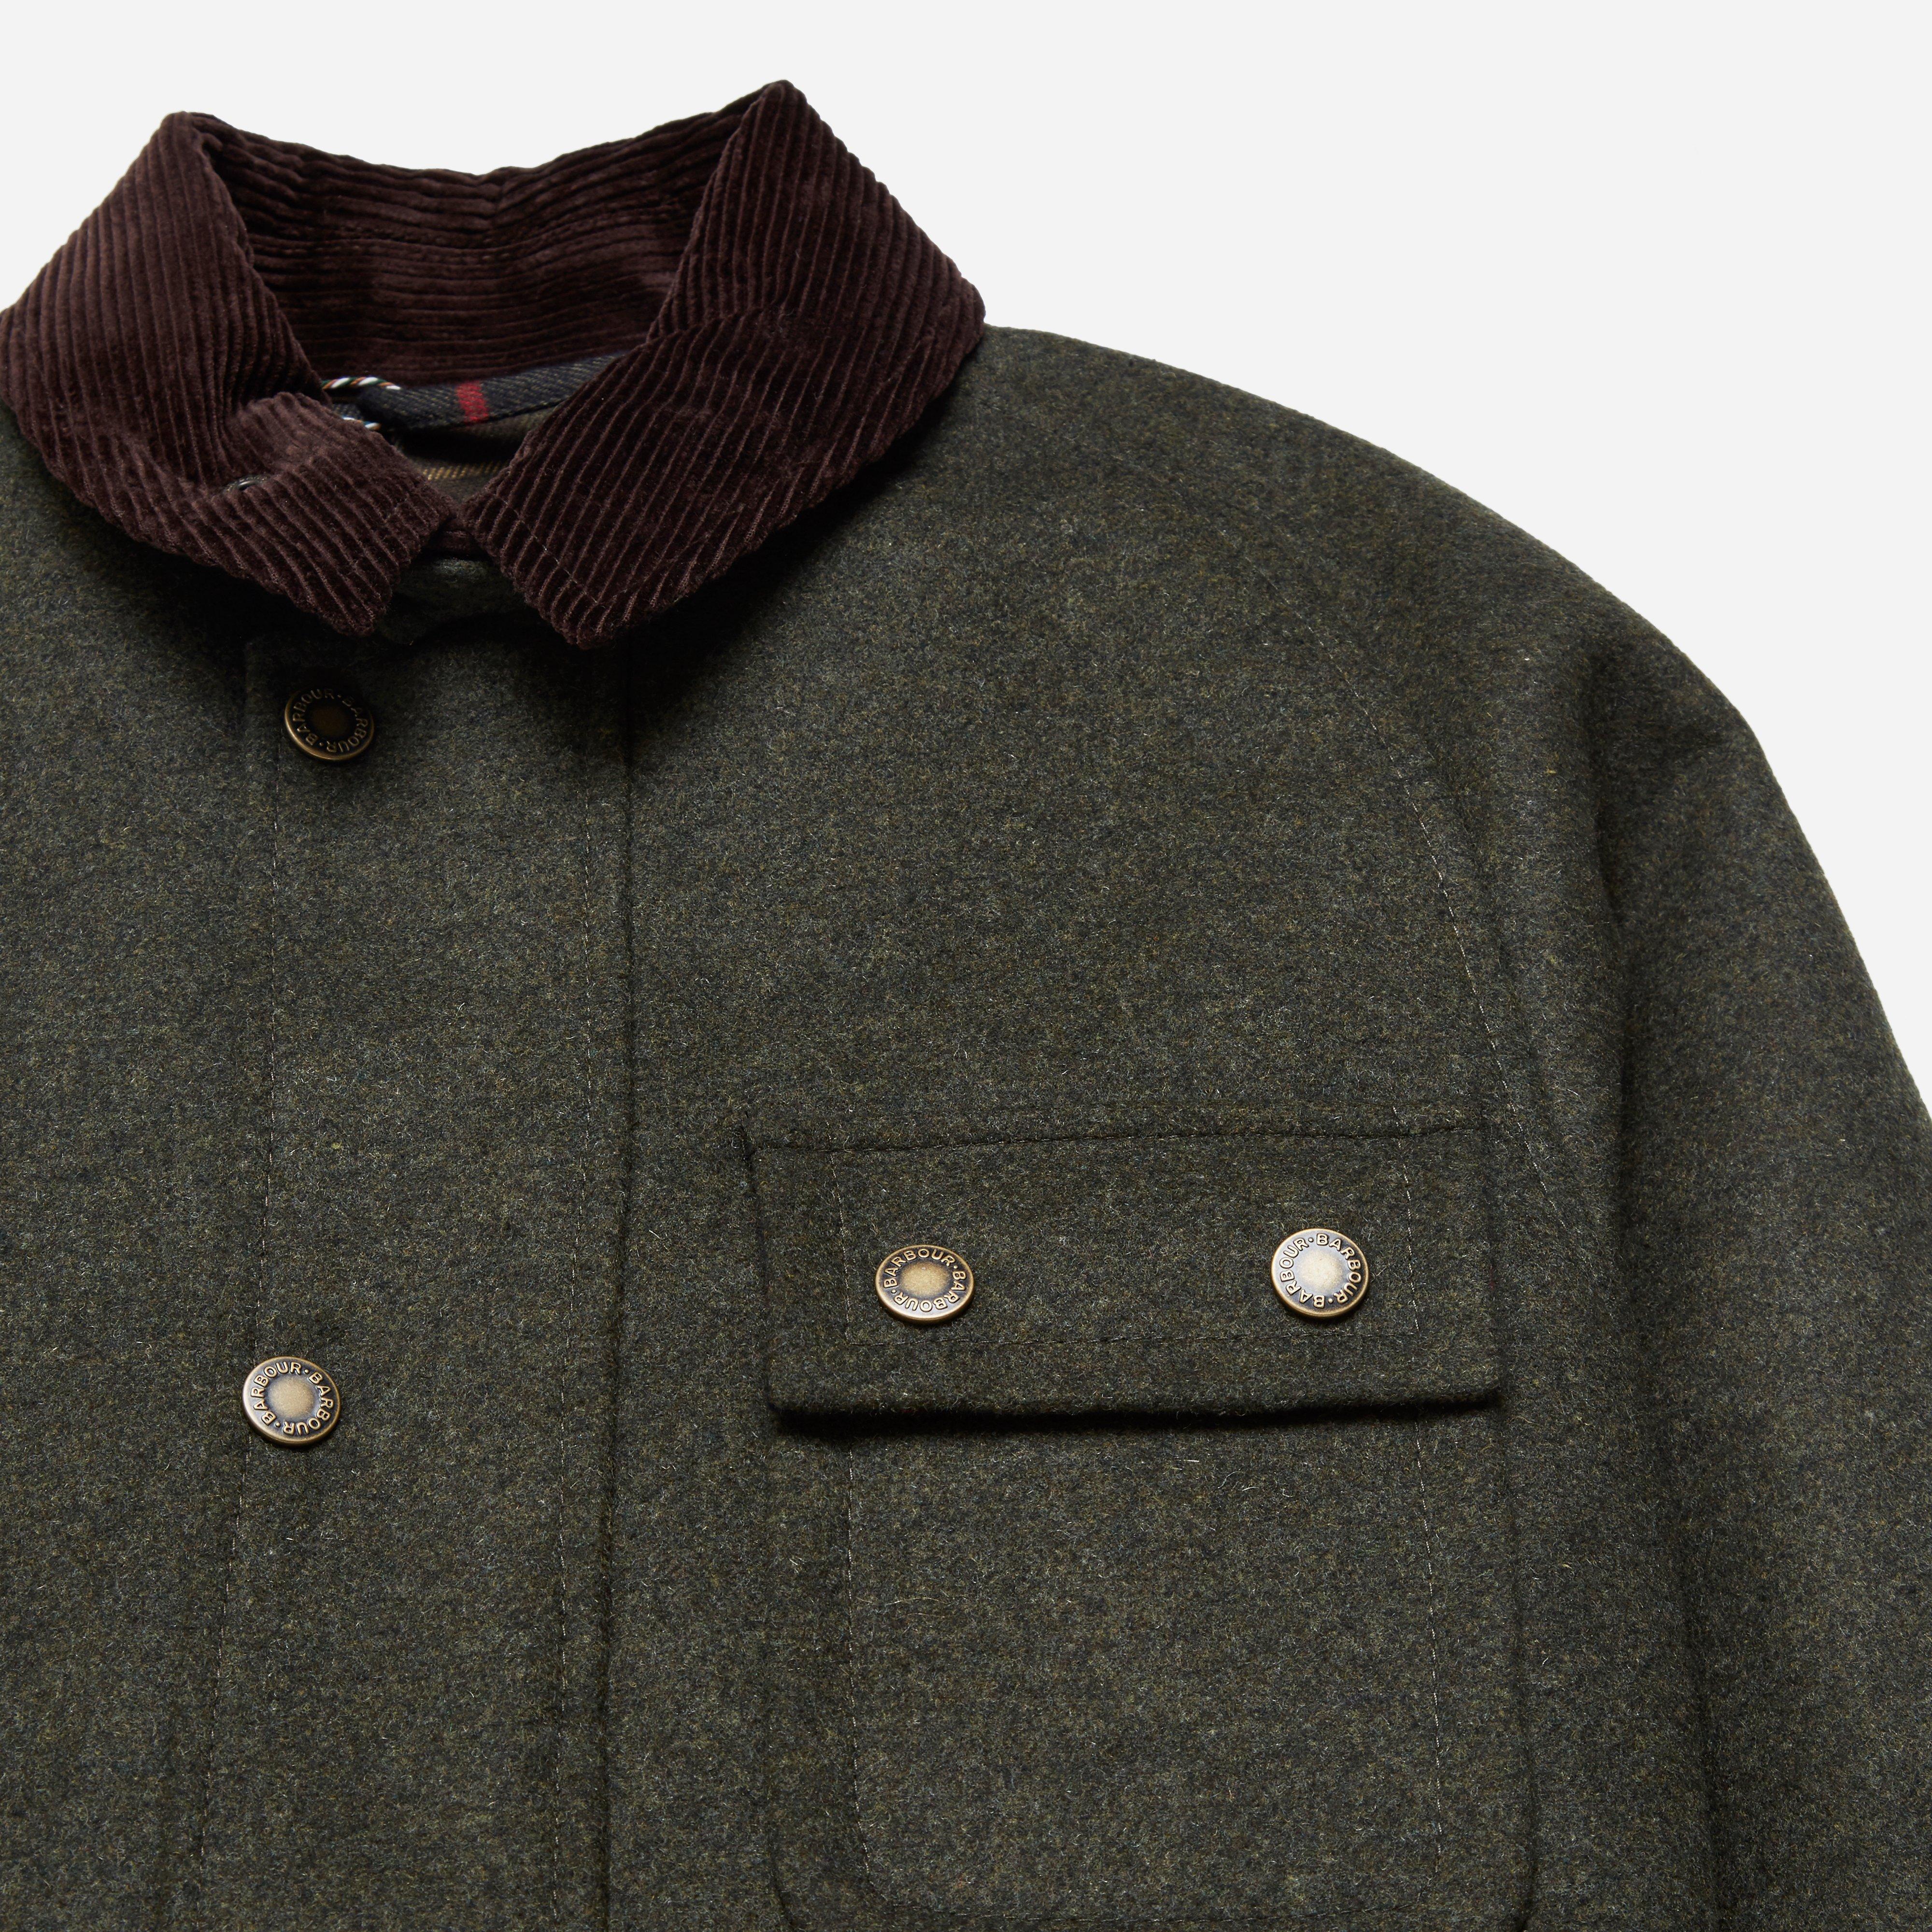 Lyst - Barbour Huntroyde Wool Jacket in Green for Men